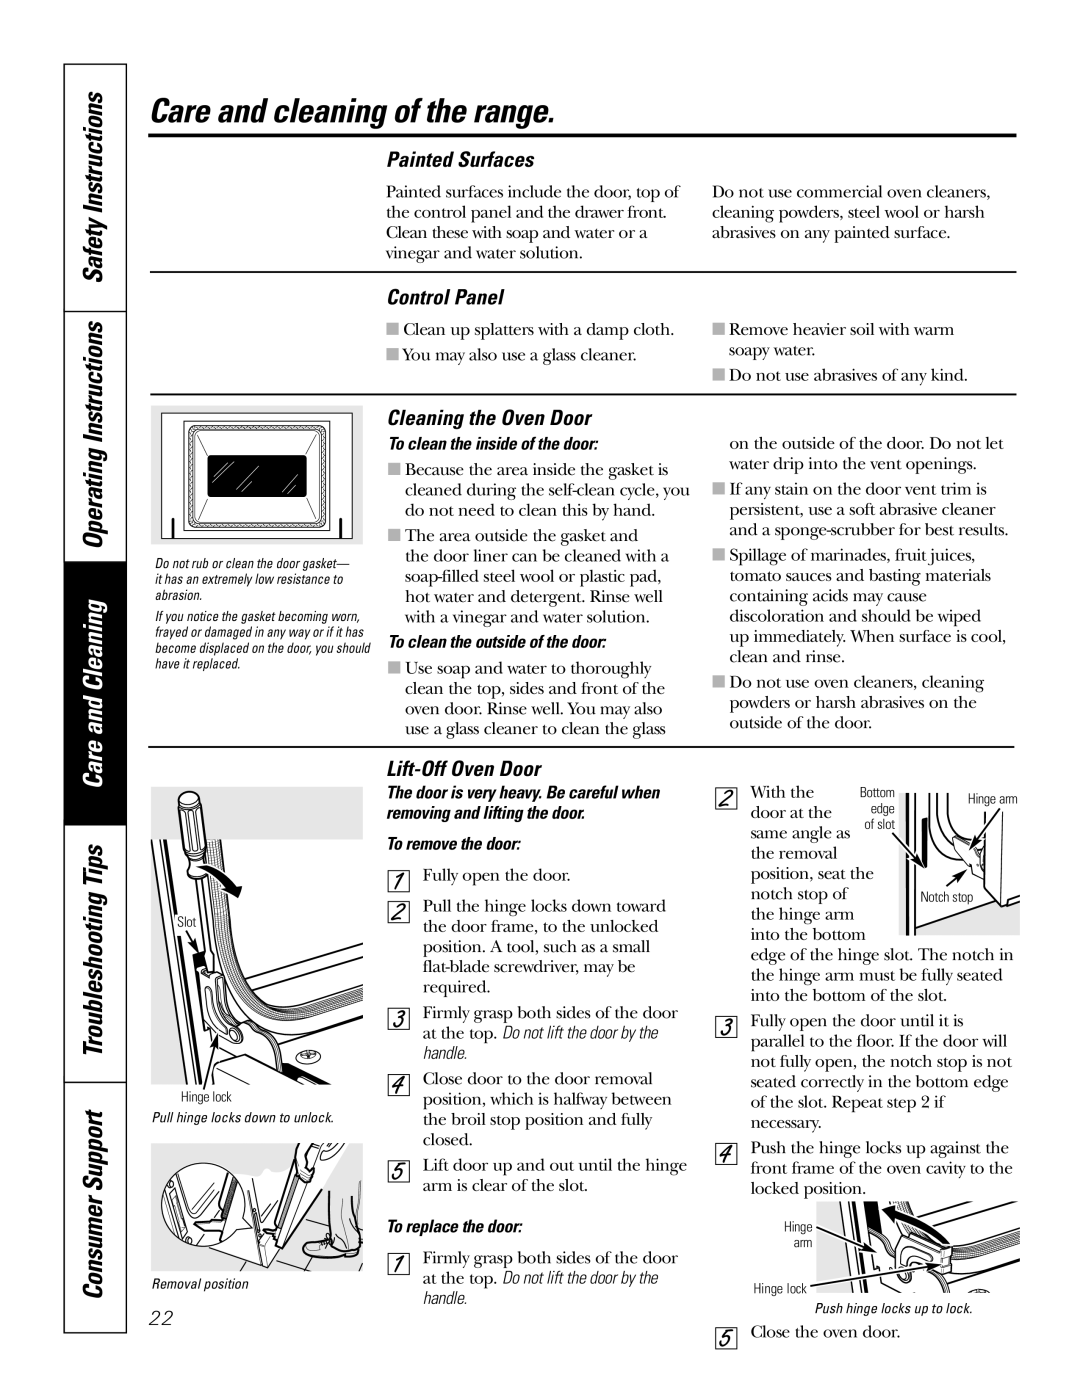 GE JS900 Instructions Safety Instructions, and Cleaning Operating, Consumer Support Troubleshooting Tips Care, handle 